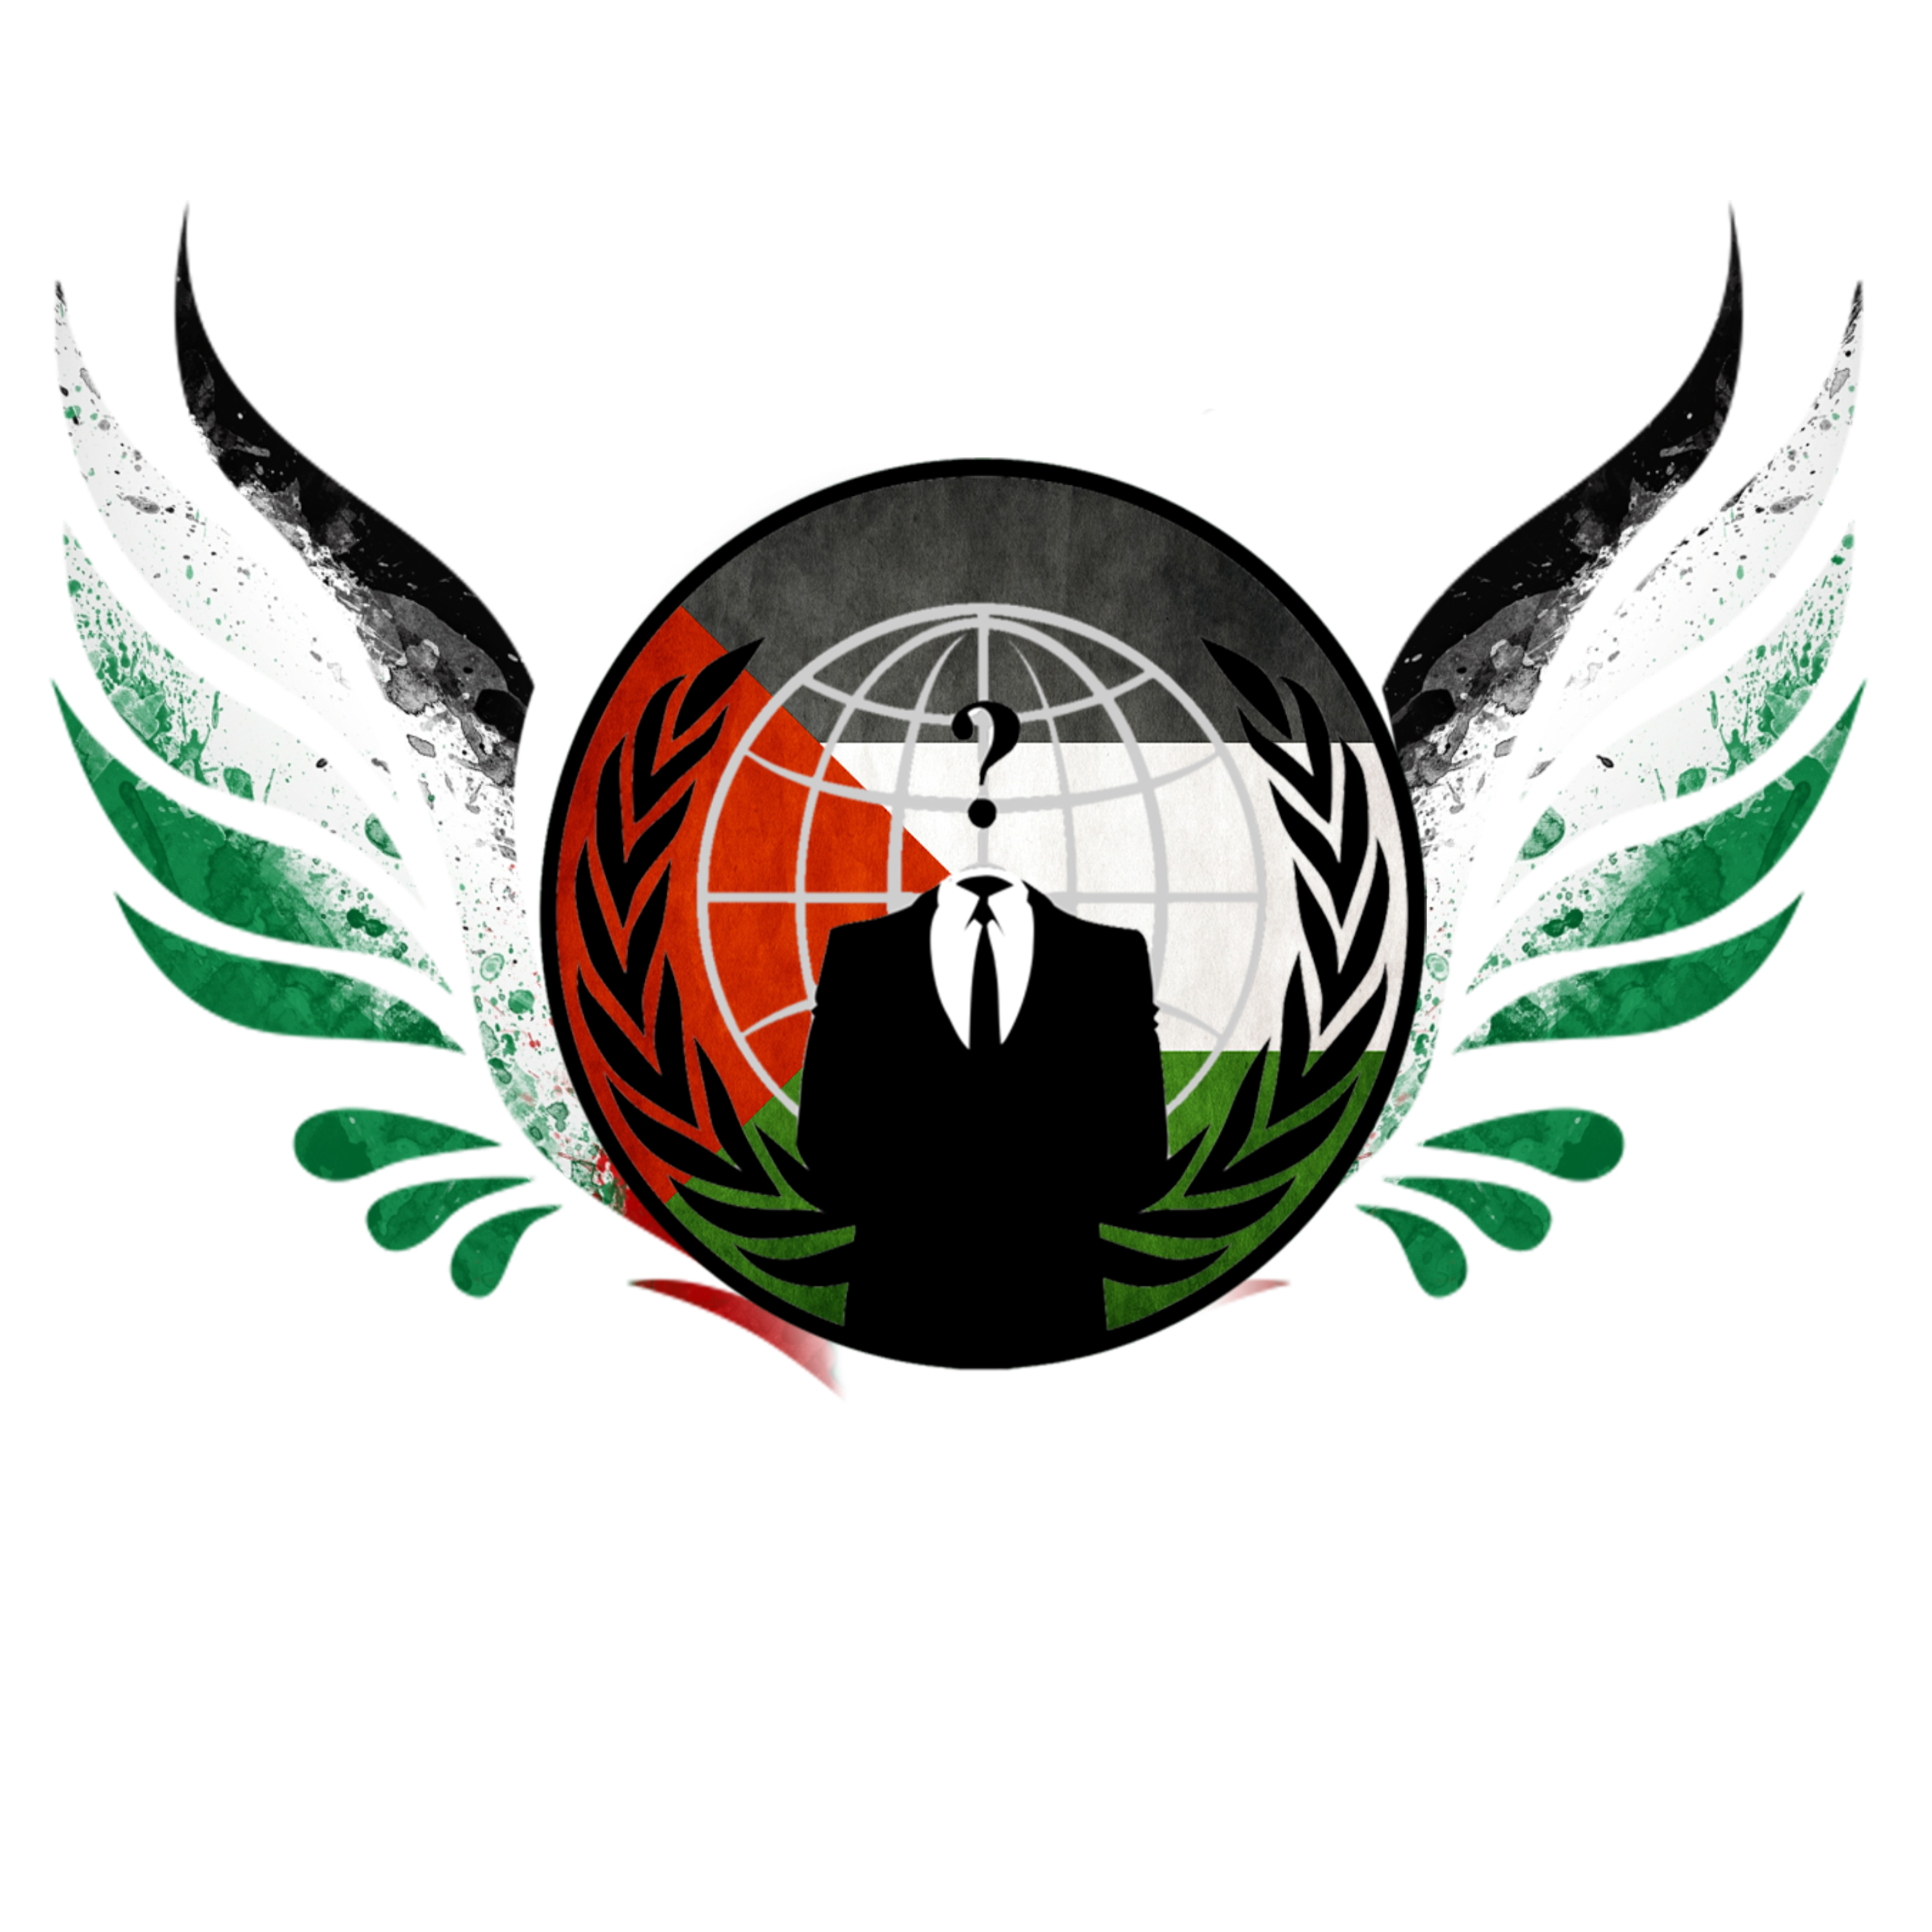 Hacked By Anonymous Ps Hacked By Anonymous Ps Im A Palestinein Hacker And Im Not Afaird From Anything Just Allah Hacked By Anonymous Ps Im A Palestinein Hacker And Im Not Afaird From Anything Just Allah פלסטין היא ערבית חופשית ف لسطين ح ره